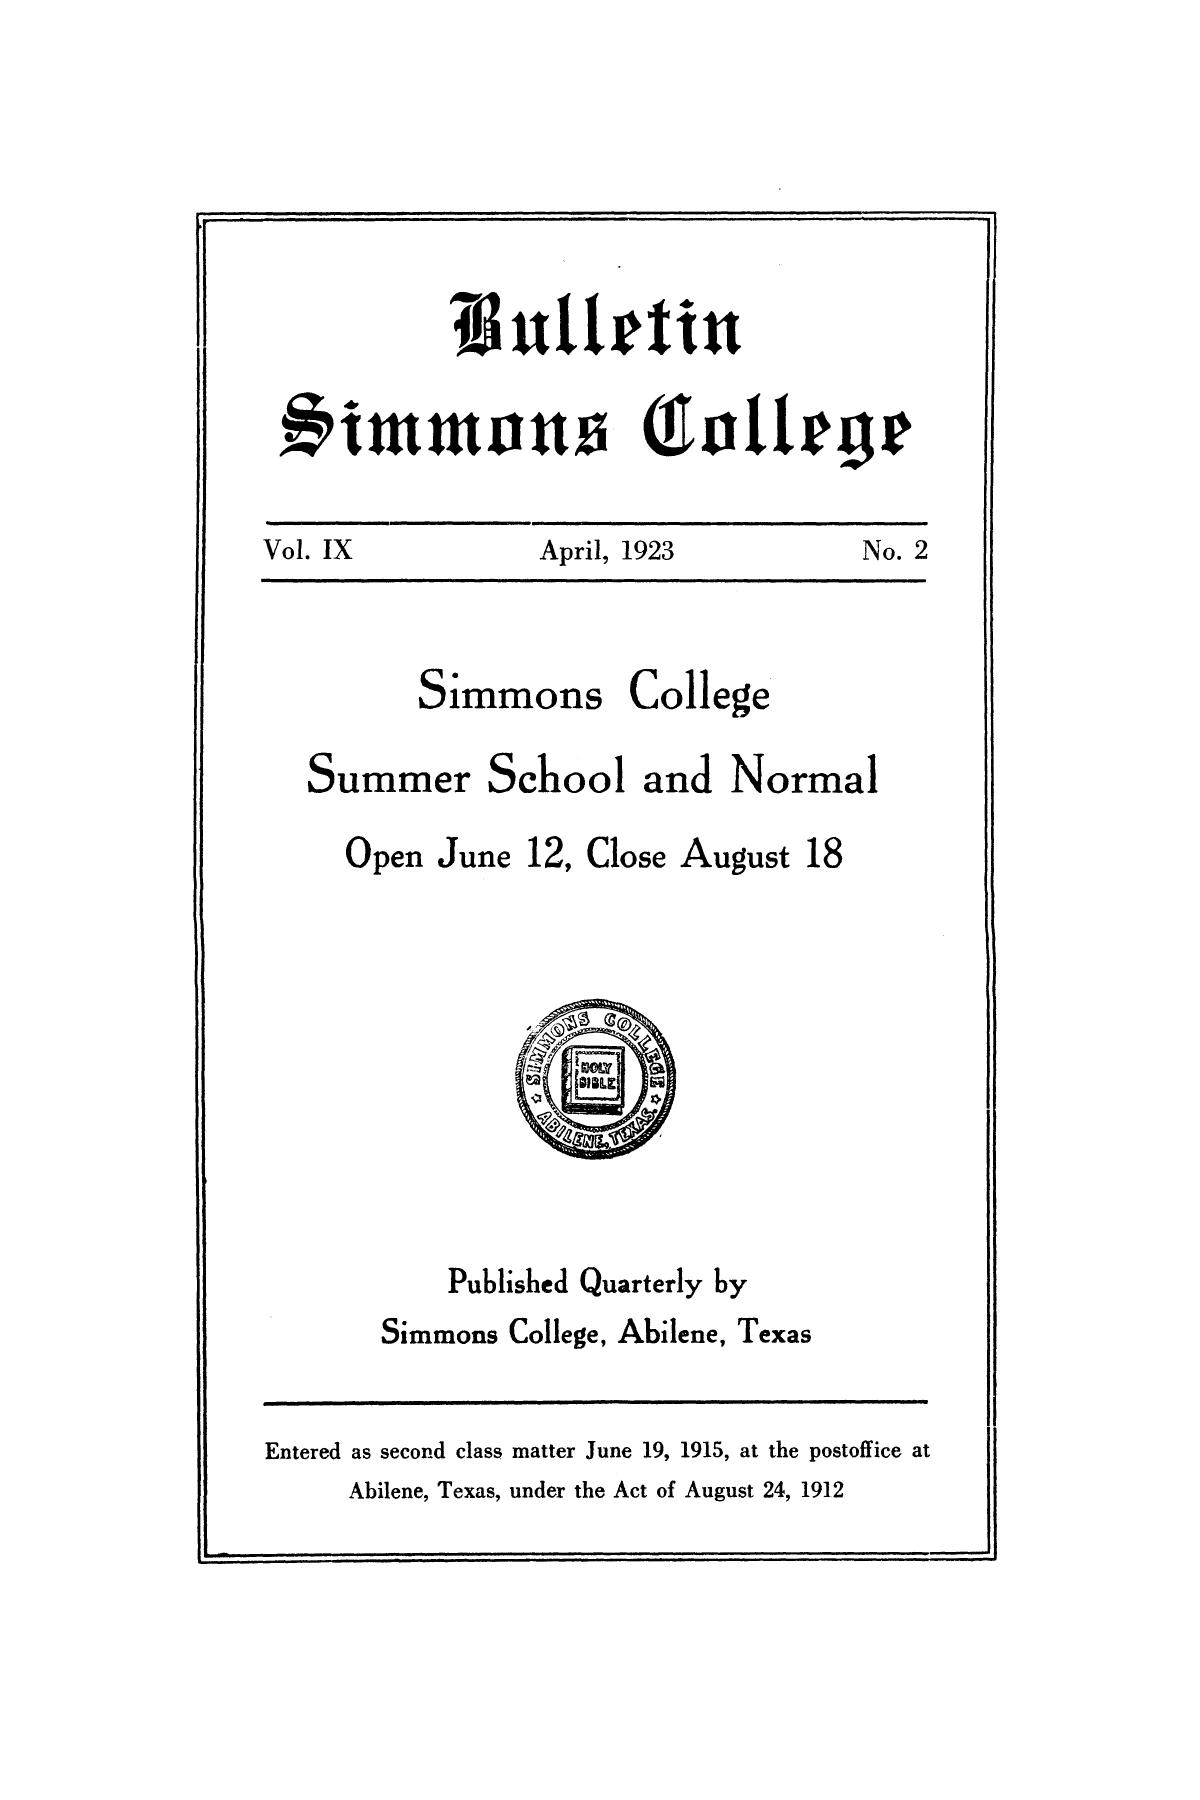 Catalogue of Simmons College, 1923 Summer School and Normal
                                                
                                                    Title Page
                                                